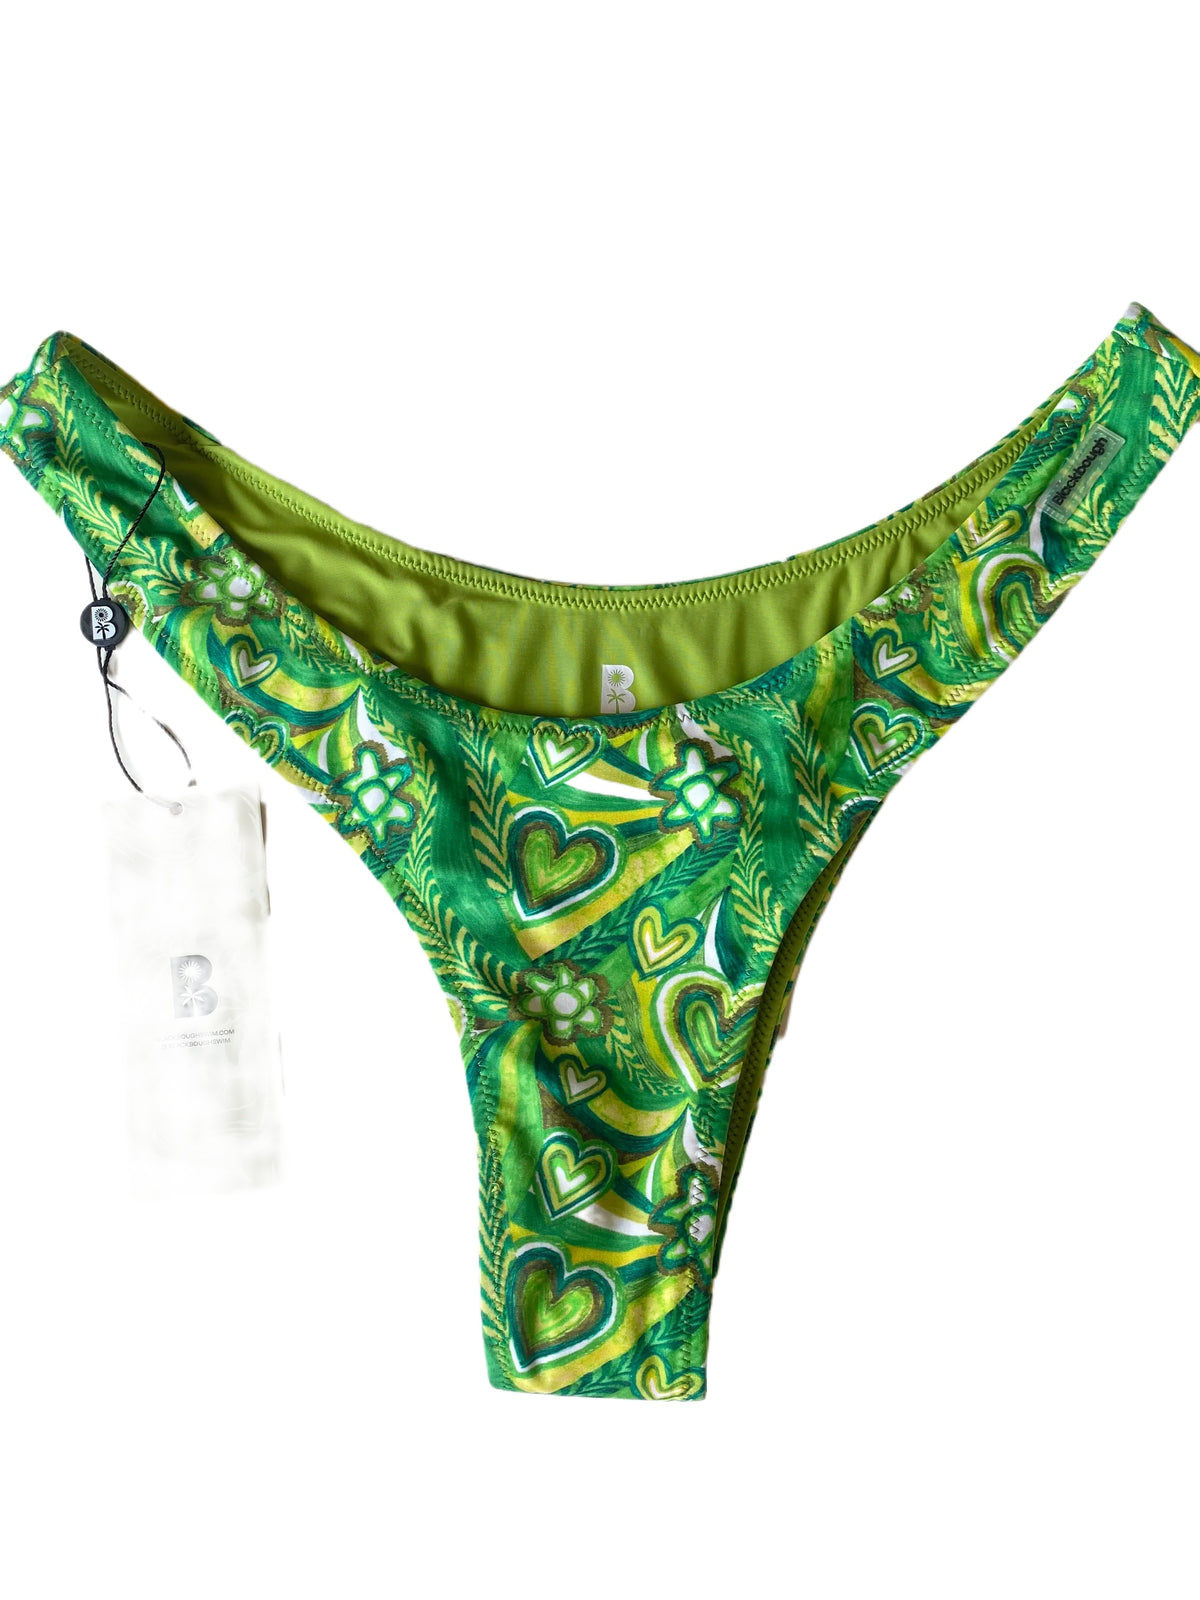 Blackbough - Martini High Rise Cheeky Bottoms in Zooted - NEW WITH TAGS